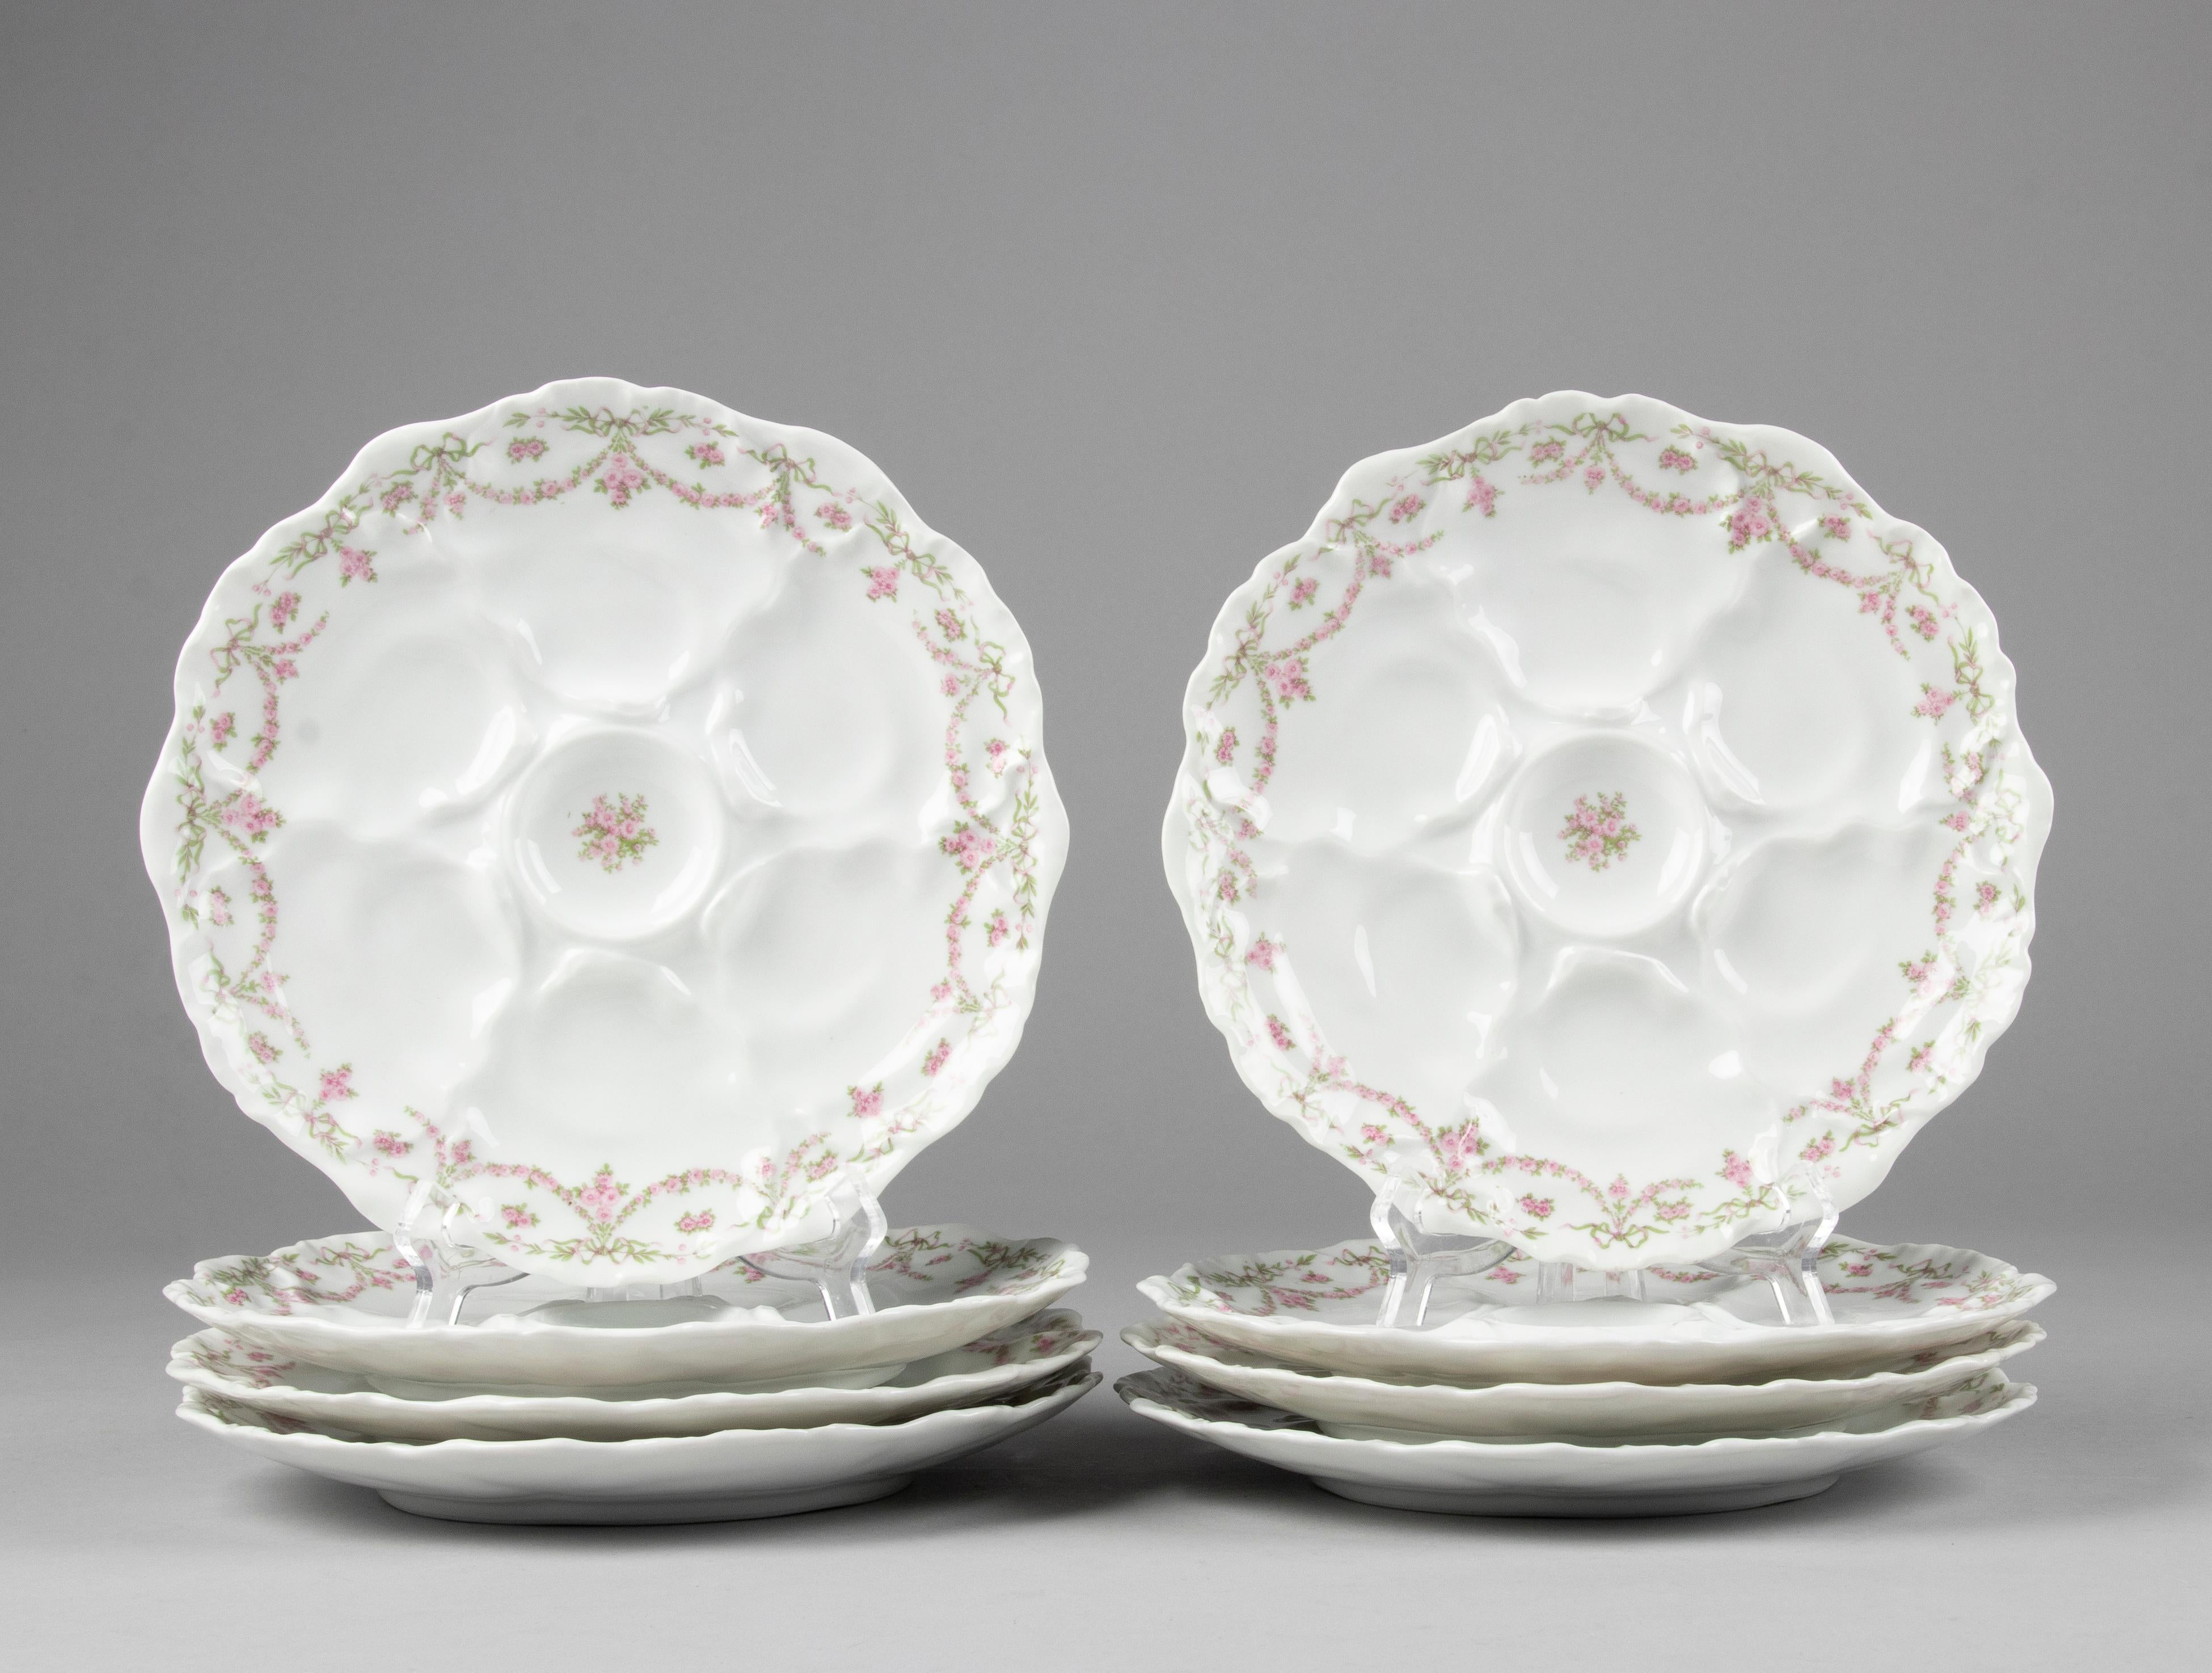 Romantic Set of 8 Porcelain Oyster Plates by Limoges